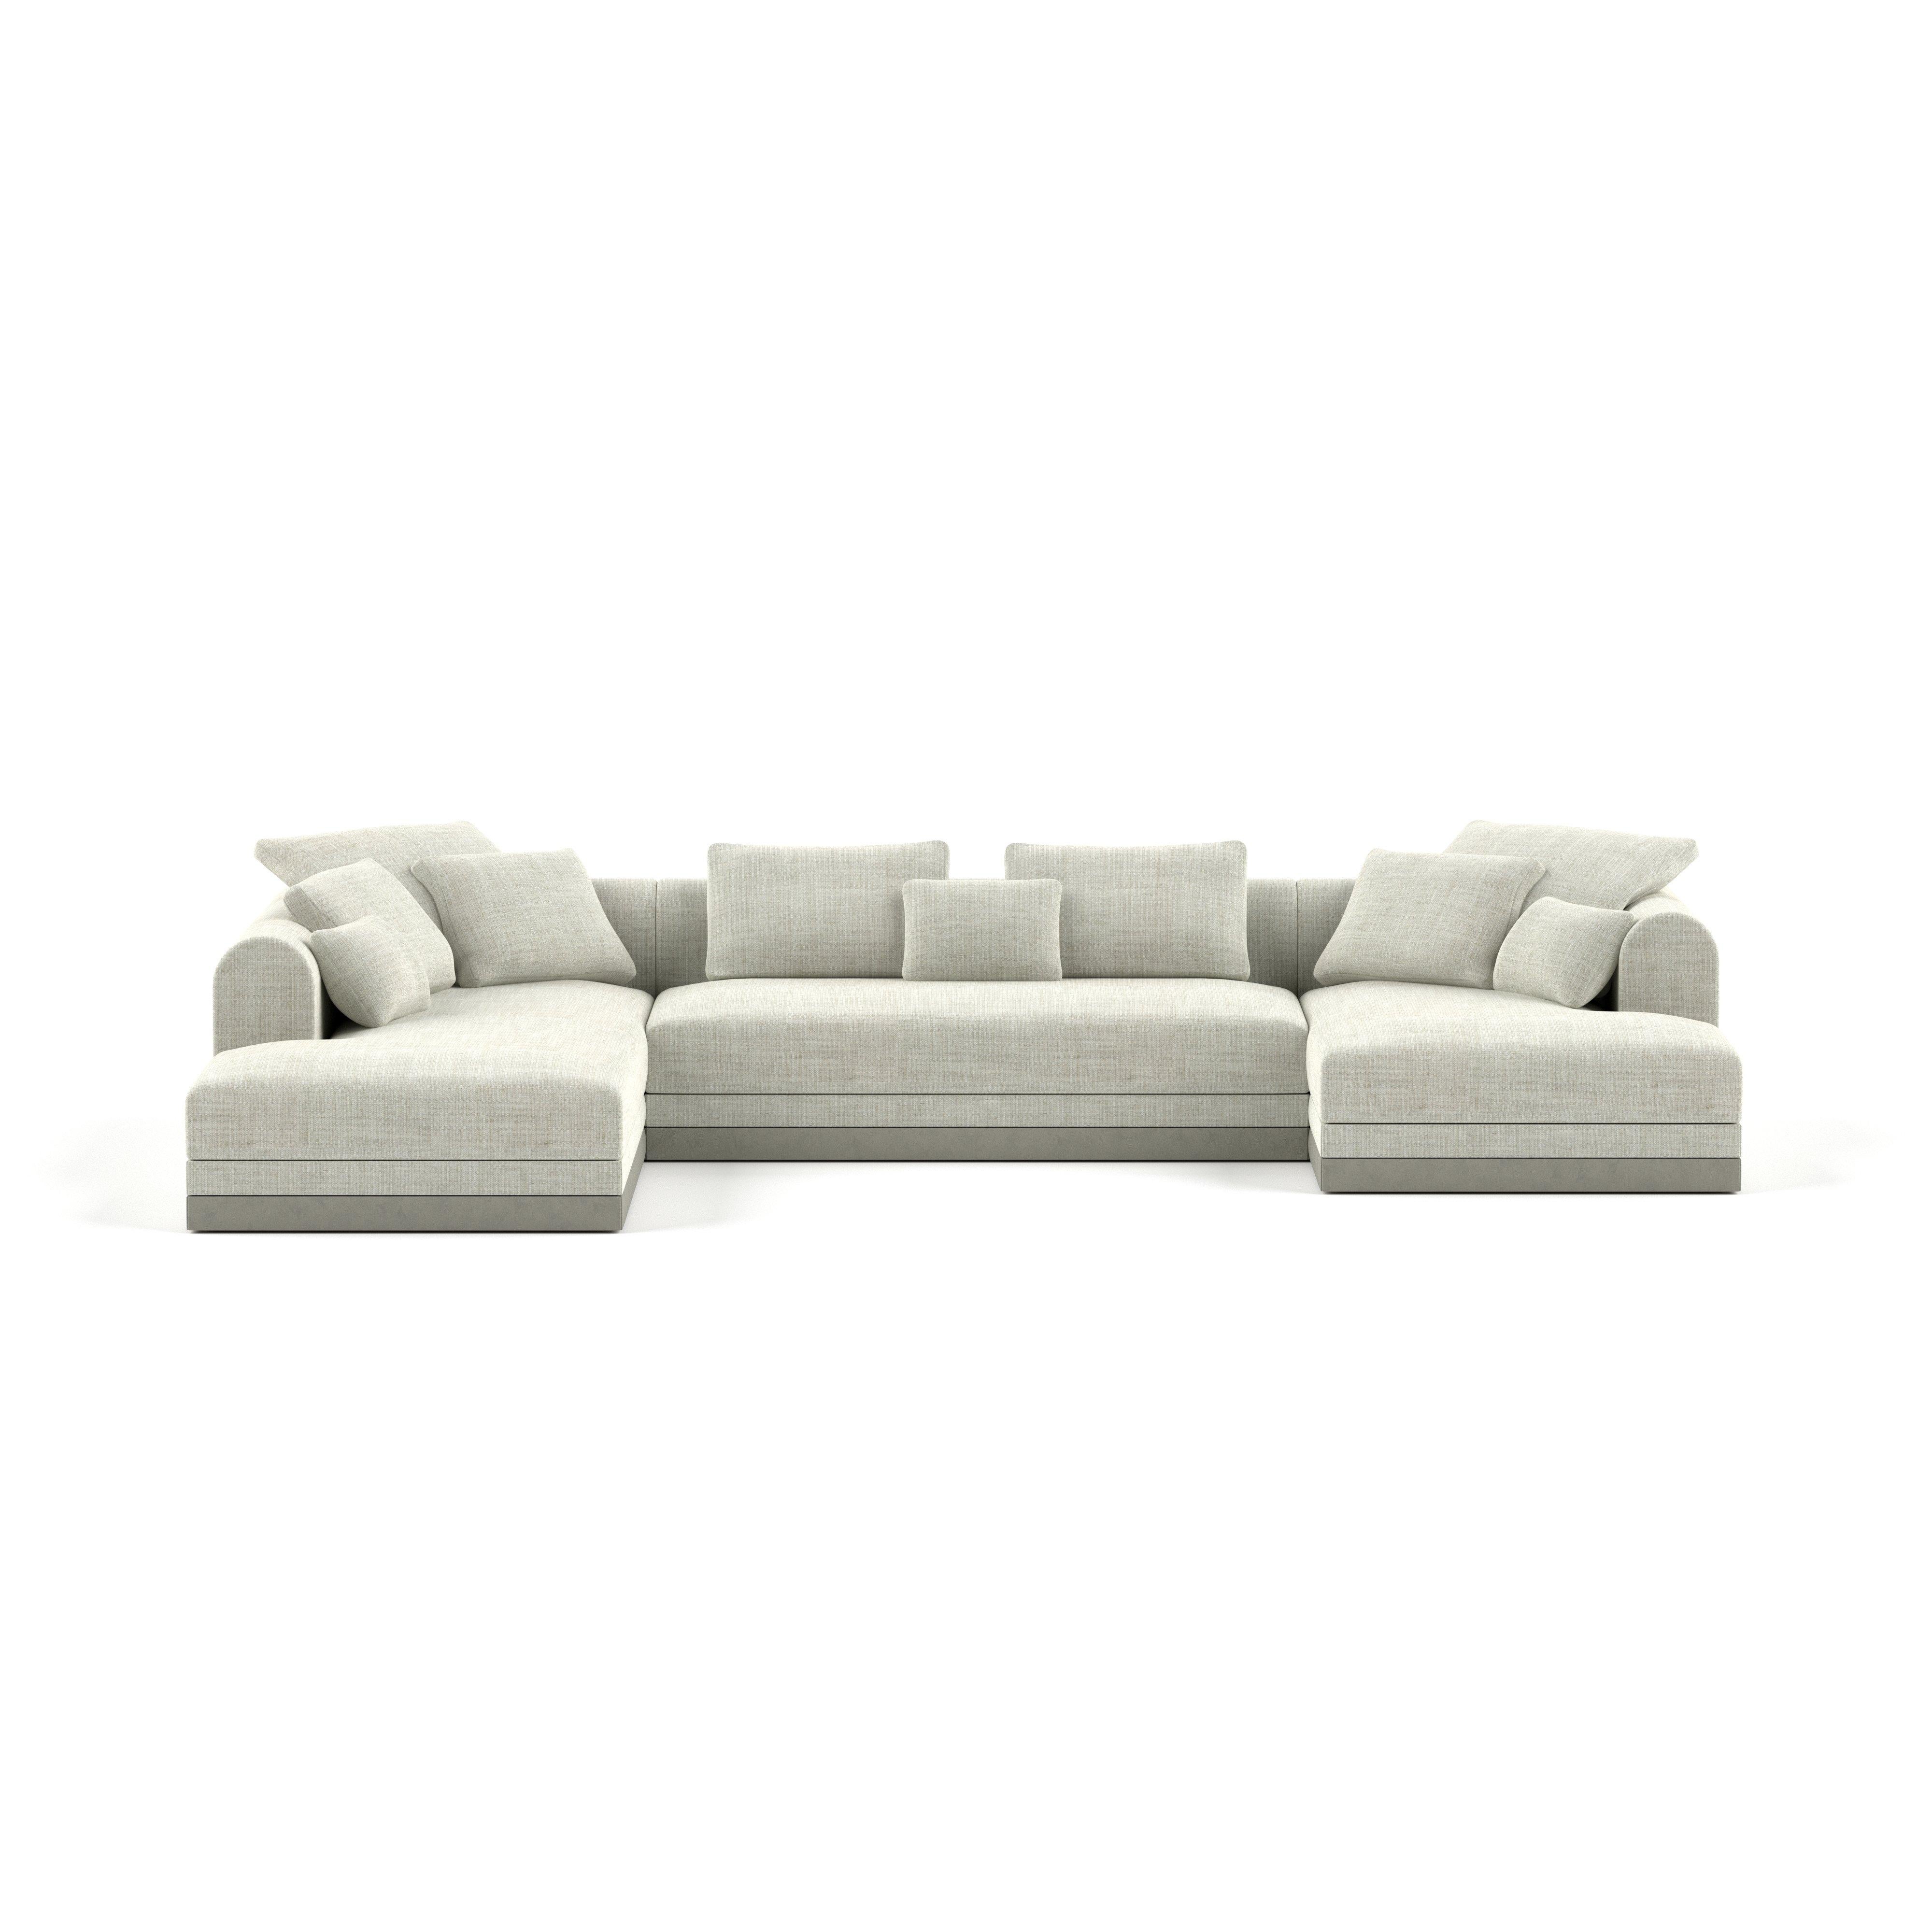 'Aqueduct' Contemporary Sofa by Poiat, Setup 4, Yang 95, Low Plinth For Sale 4